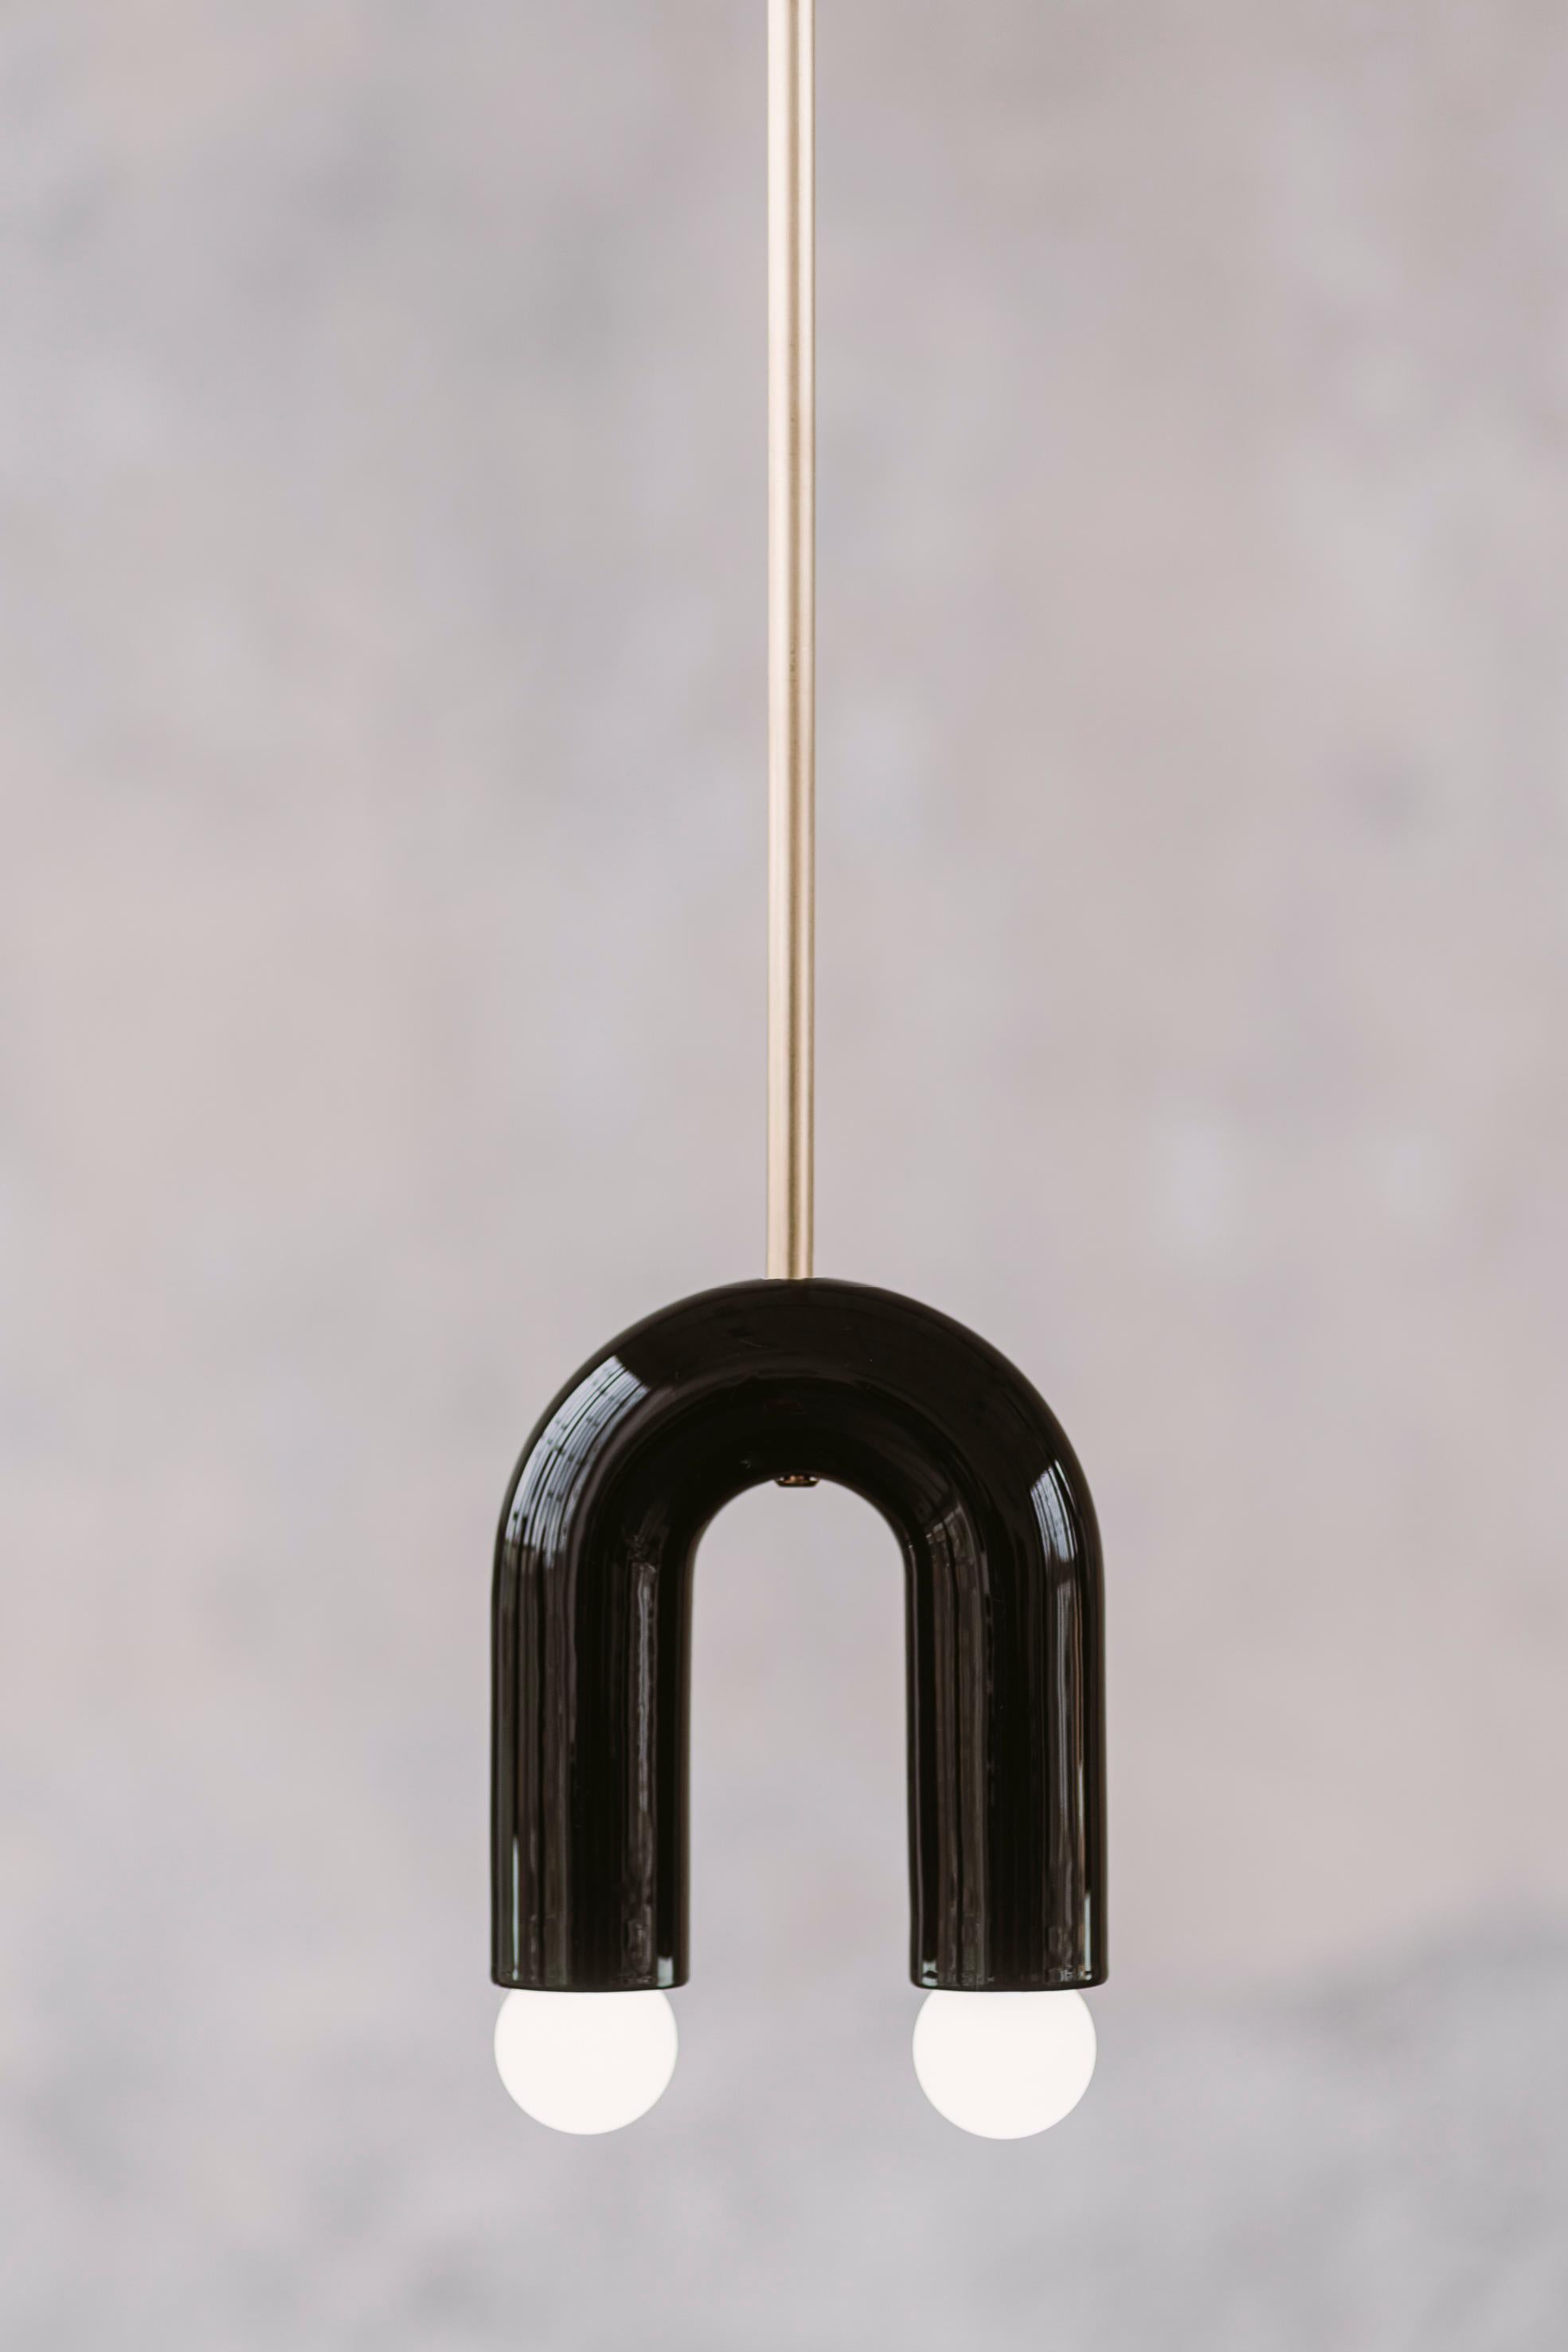 TRN A1 Pendant lamp / ceiling lamp / chandelier
Designer: Pani Jurek

Model shown: TRN A1 Brown, brass rod
Dimensions: H 17.5 x 15 x 5 cm

Bulb (not included): E27/E26, compatible with US electric system

Materials: Hand glazed ceramic and